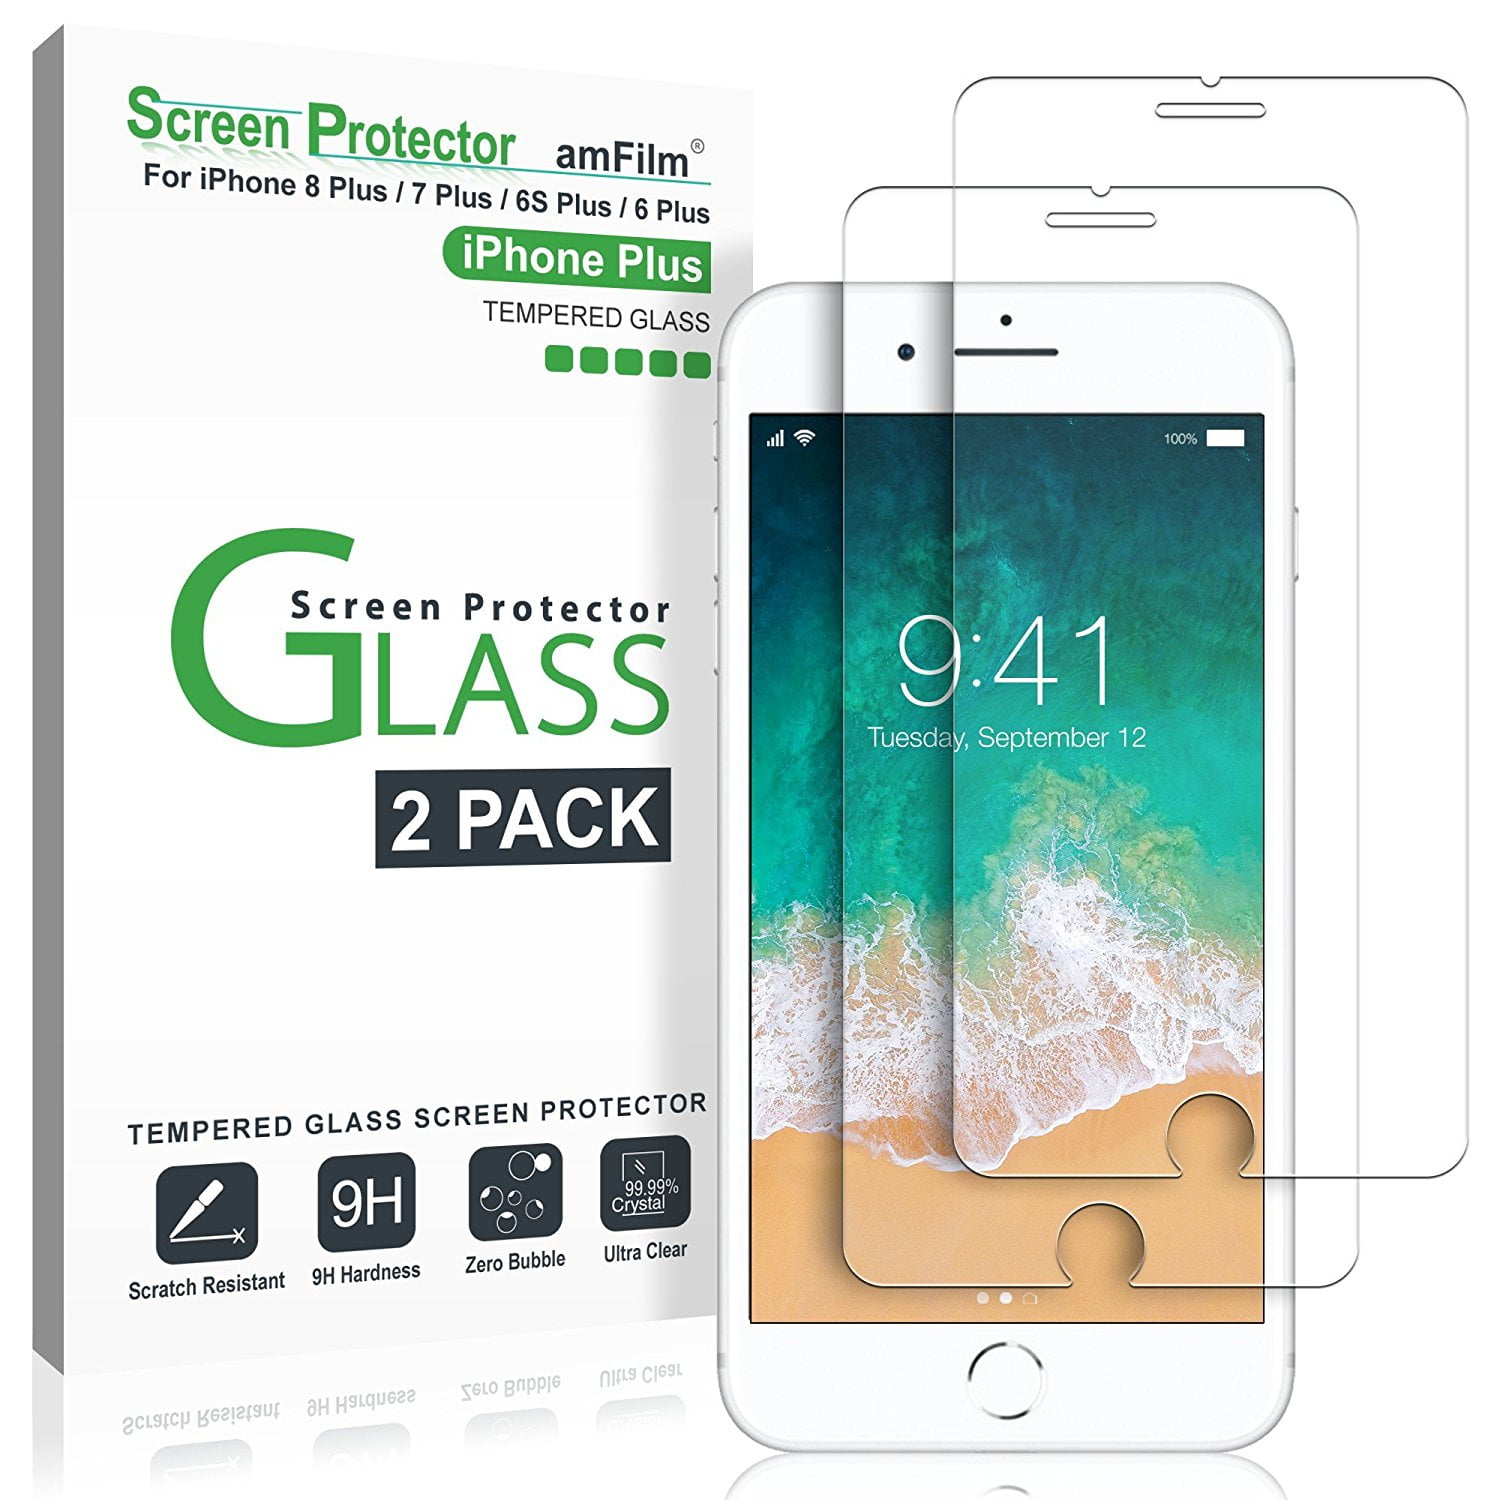 Tempered Glass with Accurate Touch and Anti-Scratch and Anti-Smudge Glass Screen Protector for iPhone 6/7/8 Plus or iPhone 6s/7s/8s Plus 3 Pack Easy Installation & Fits Most Cases